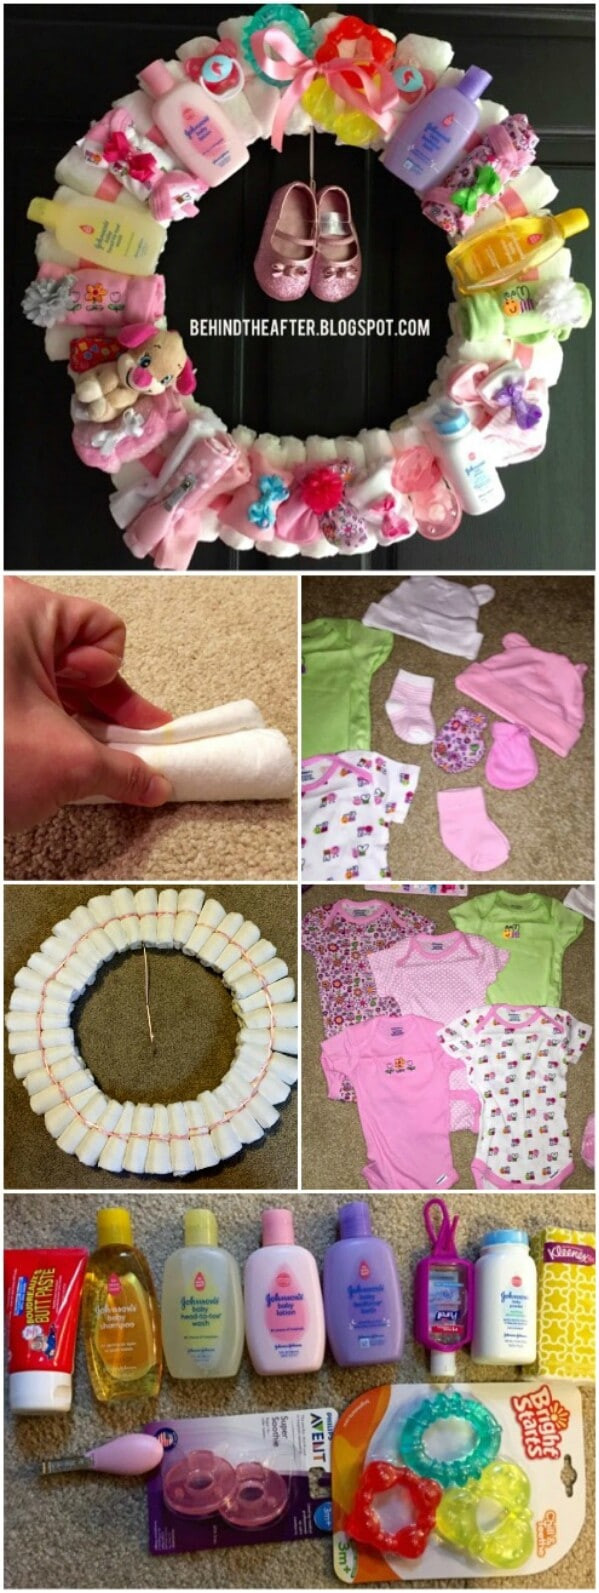 Baby Shower Gift Ideas
 25 Enchantingly Adorable Baby Shower Gift Ideas That Will